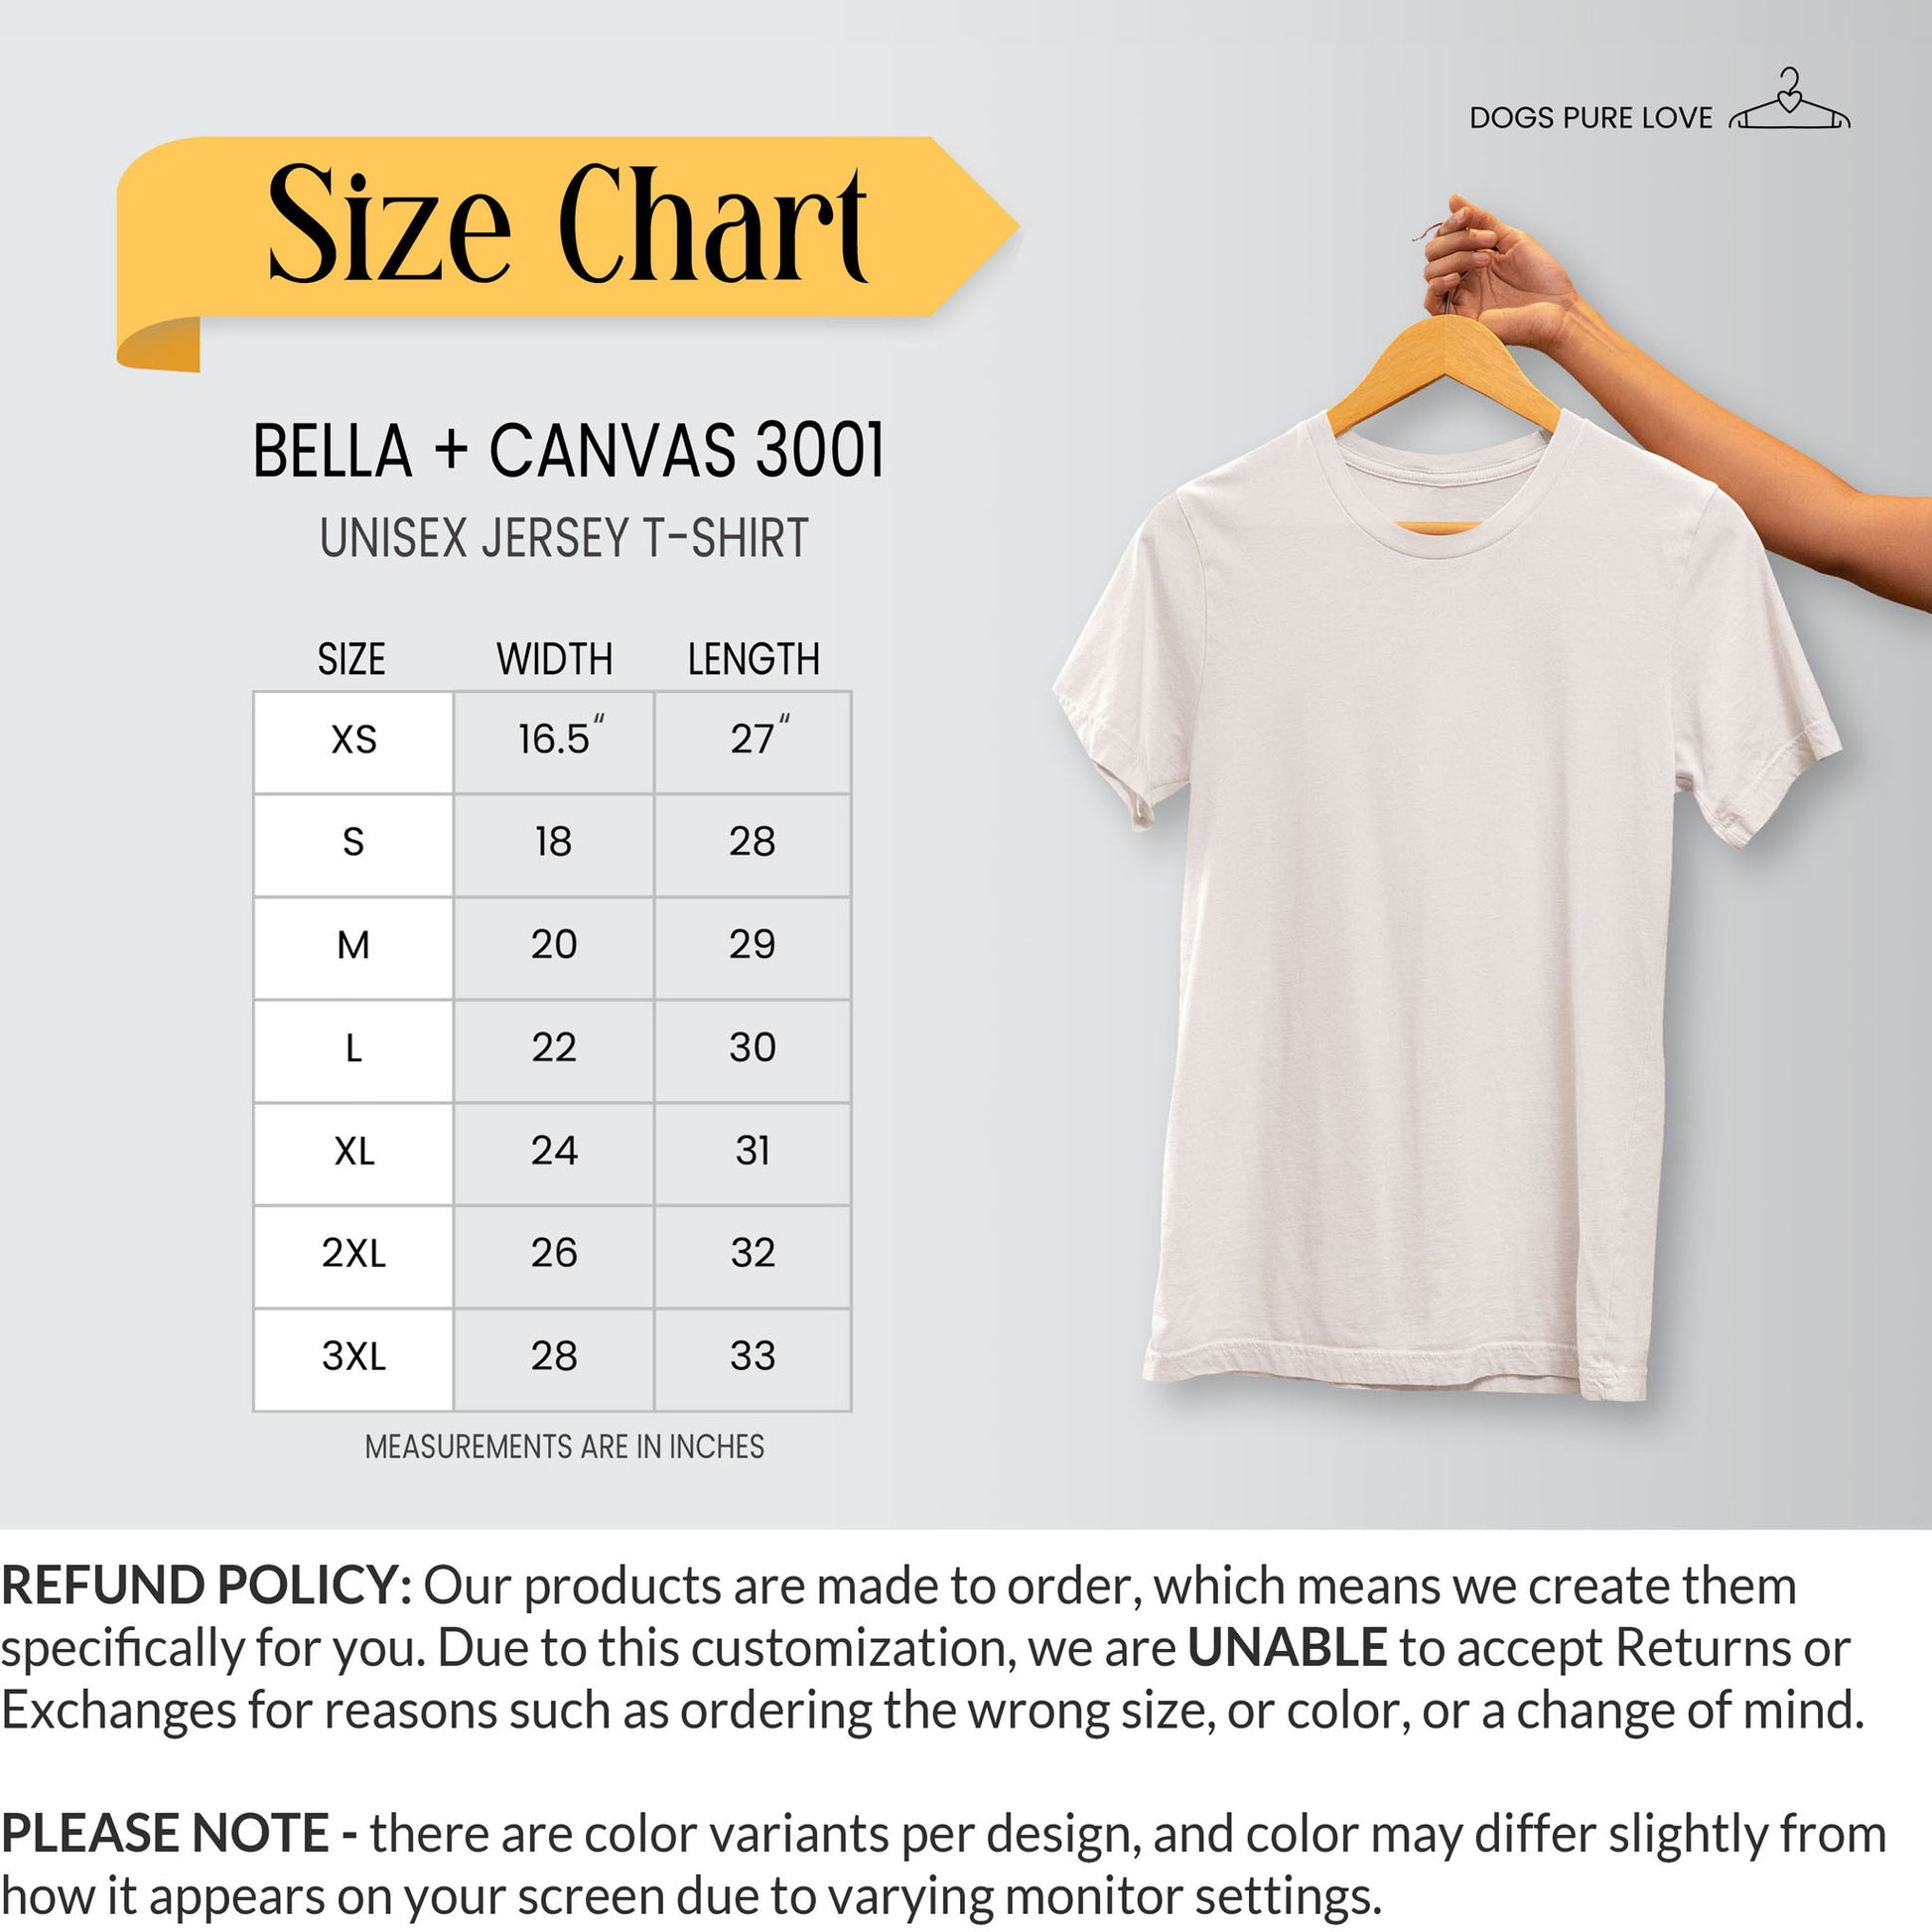 Dogs Pure Love t-shirt size chart with measurements, and a small Refund Policy description.